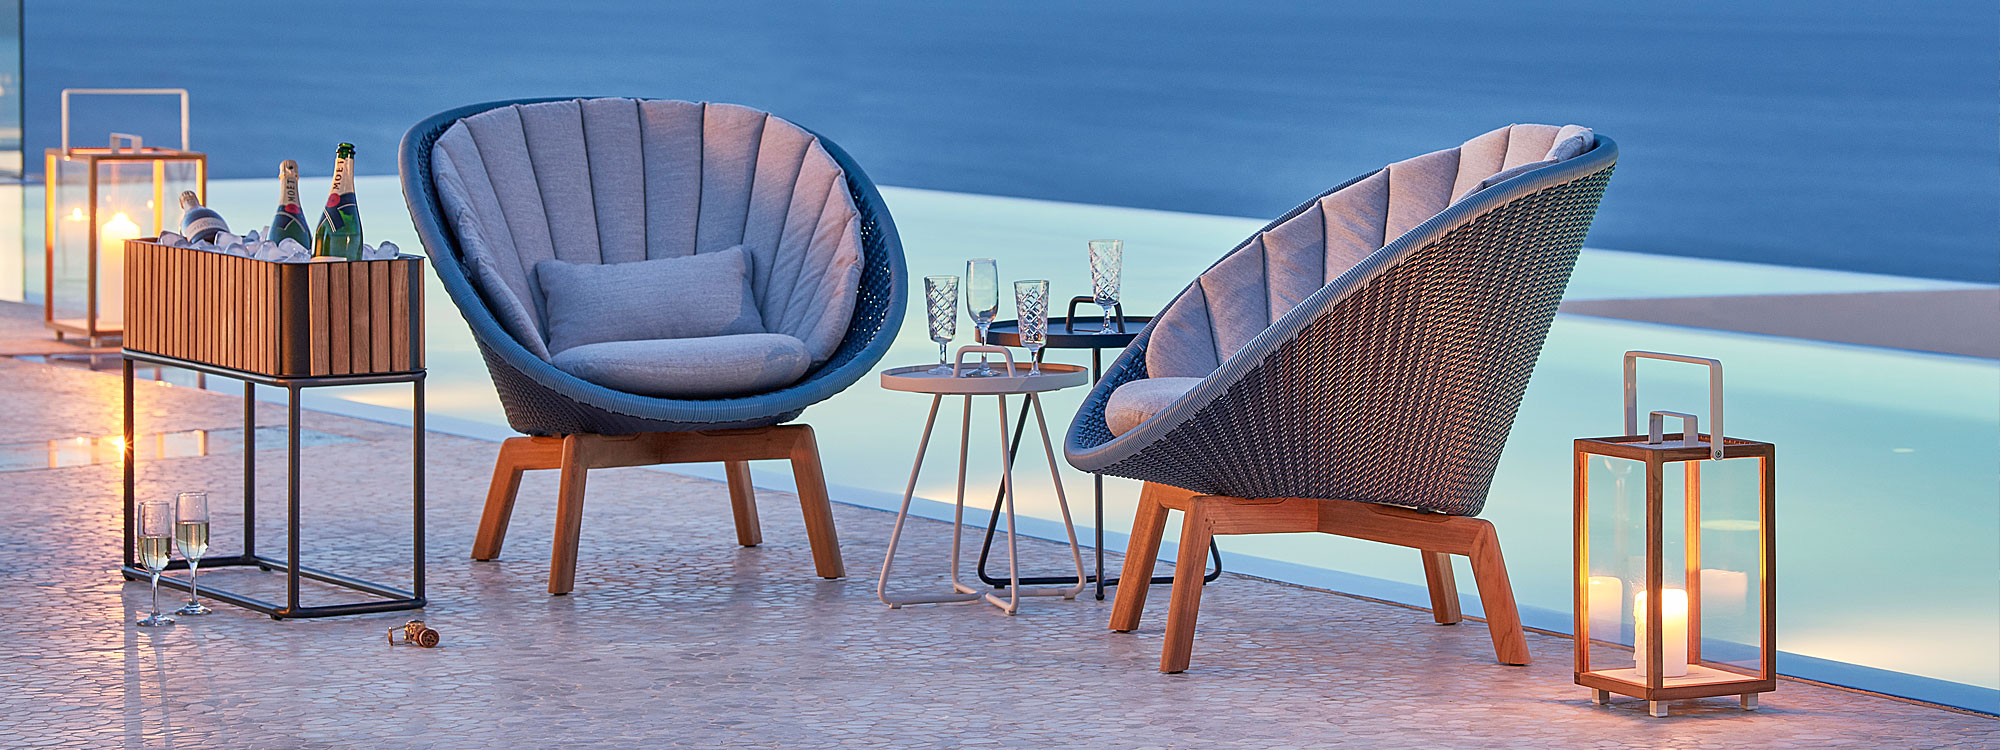 Image of poolside at dusk with Peacock outdoor relax chairs in Cane-line Weave and light-grey cushions